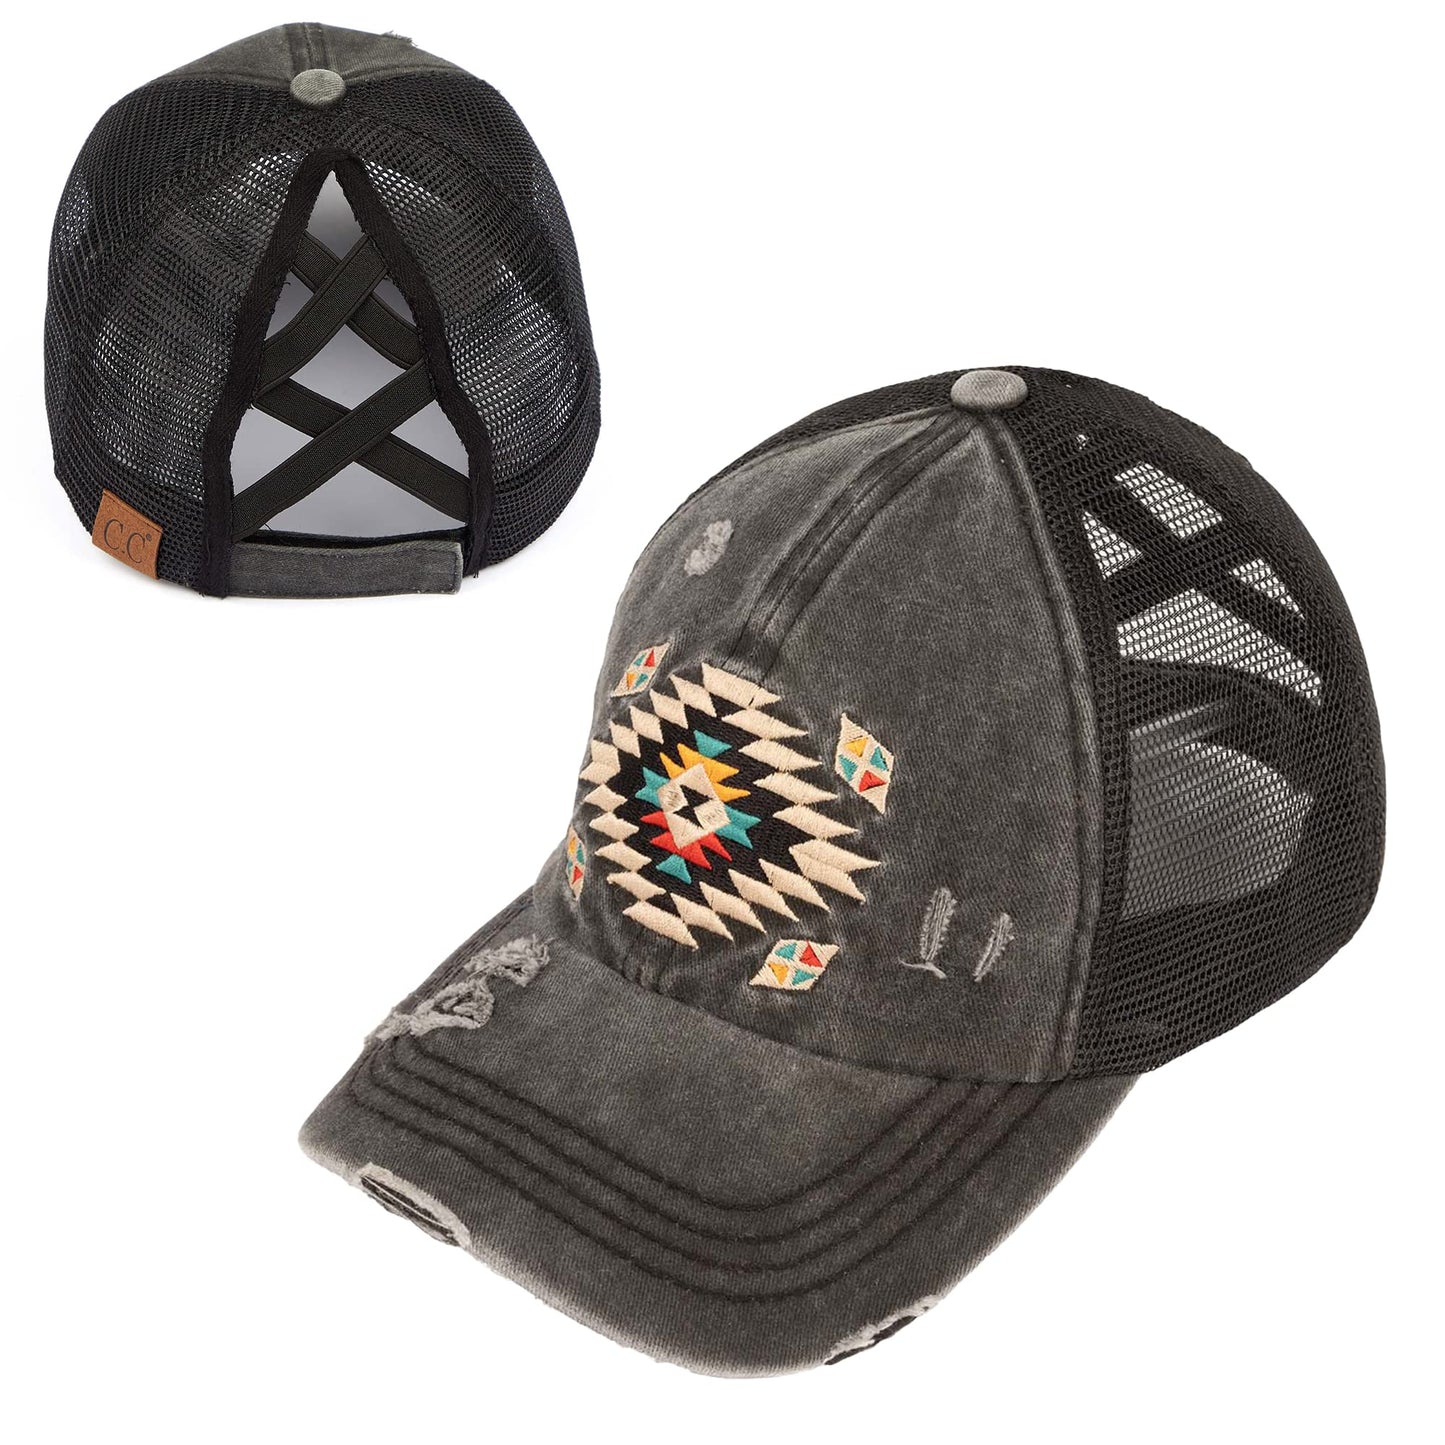 Aztec Criss Cross Ponytail Hat by Funky Junque